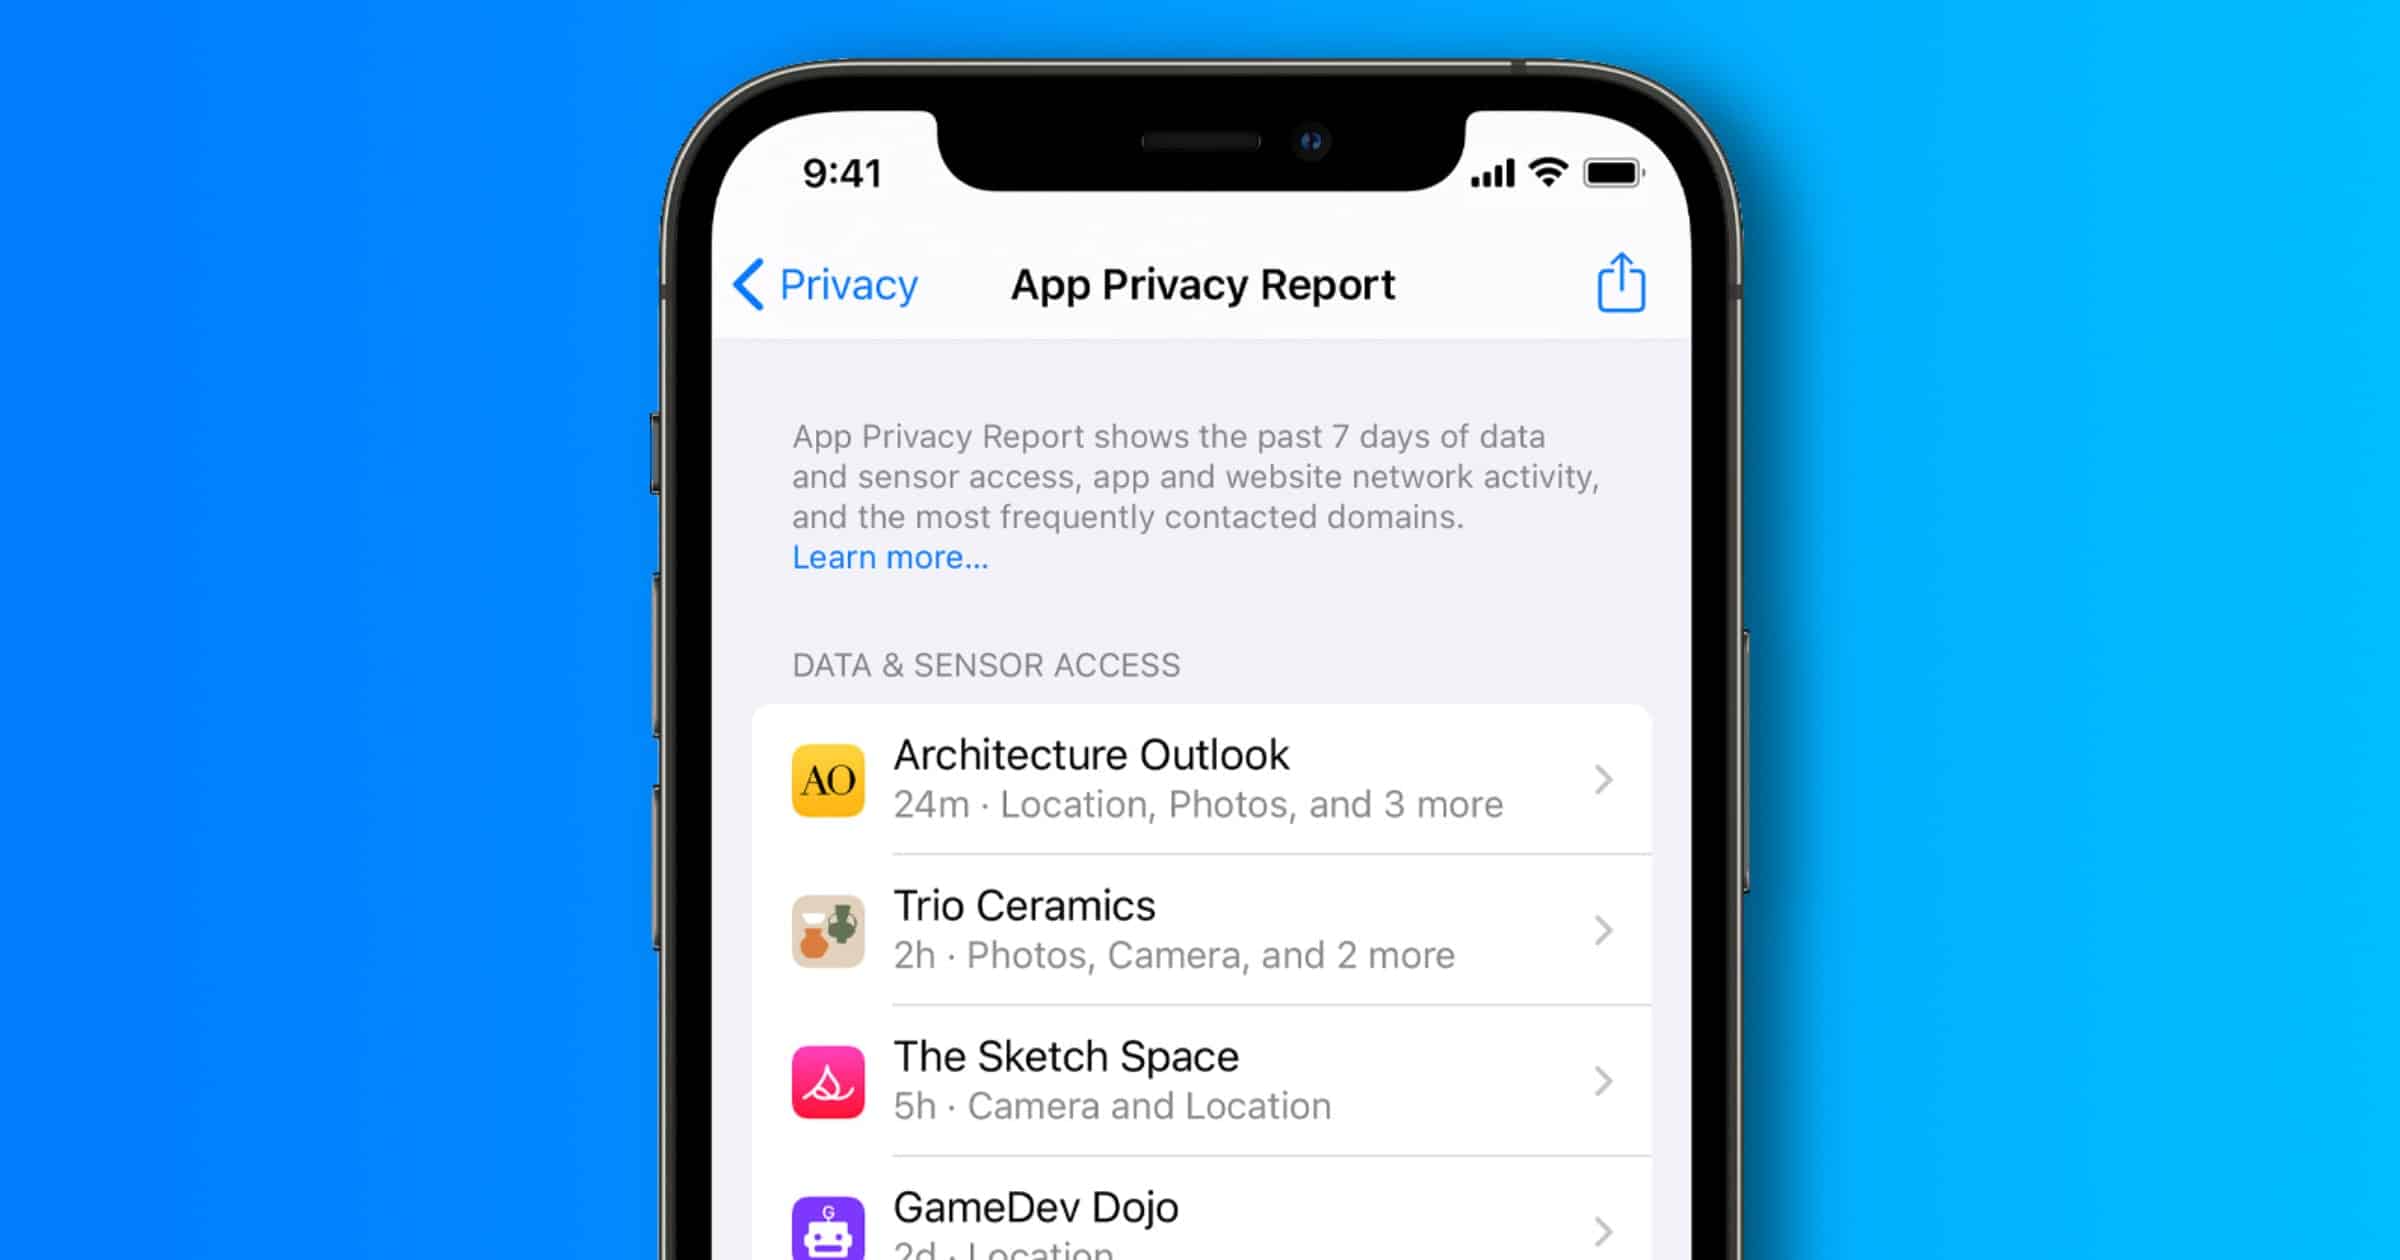 WWDC 2021: New Privacy Features Coming to iOS 15 This Fall